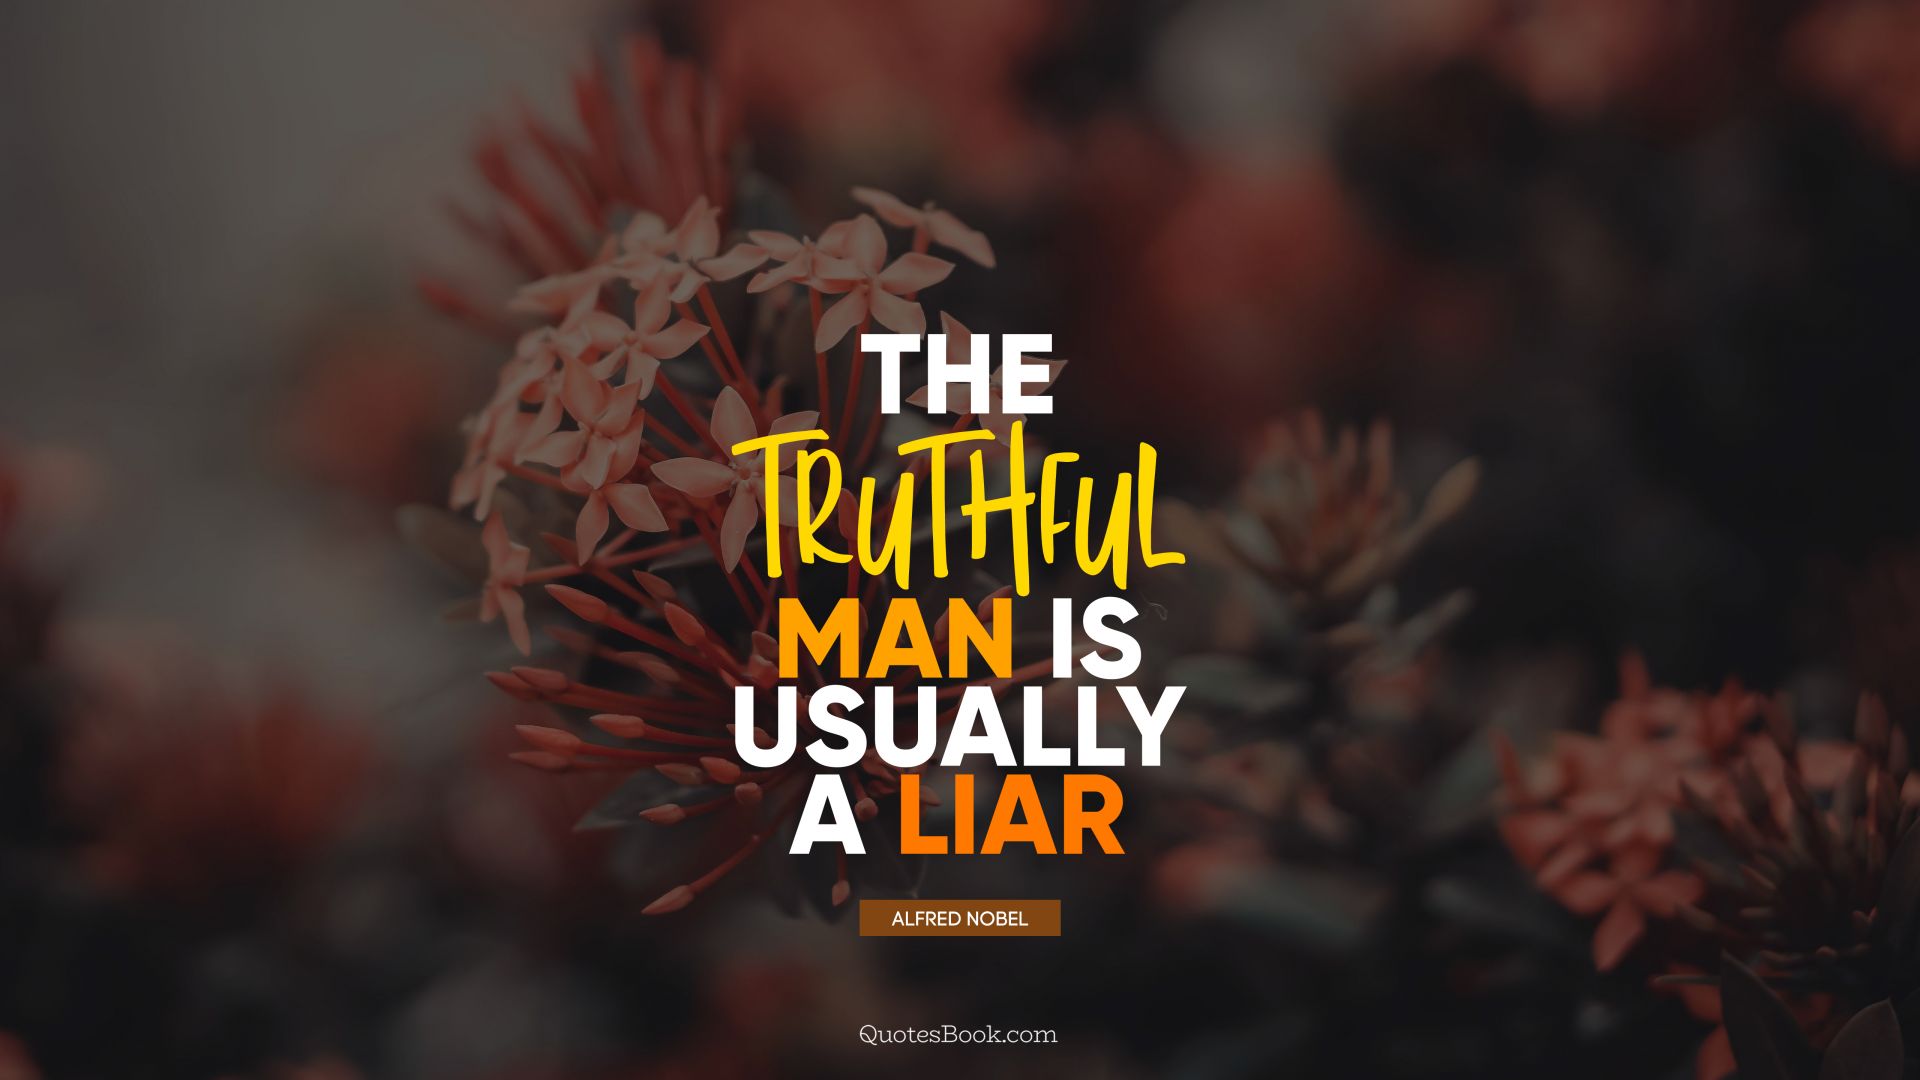 The truthful man is usually a liar. - Quote by Alfred Nobel